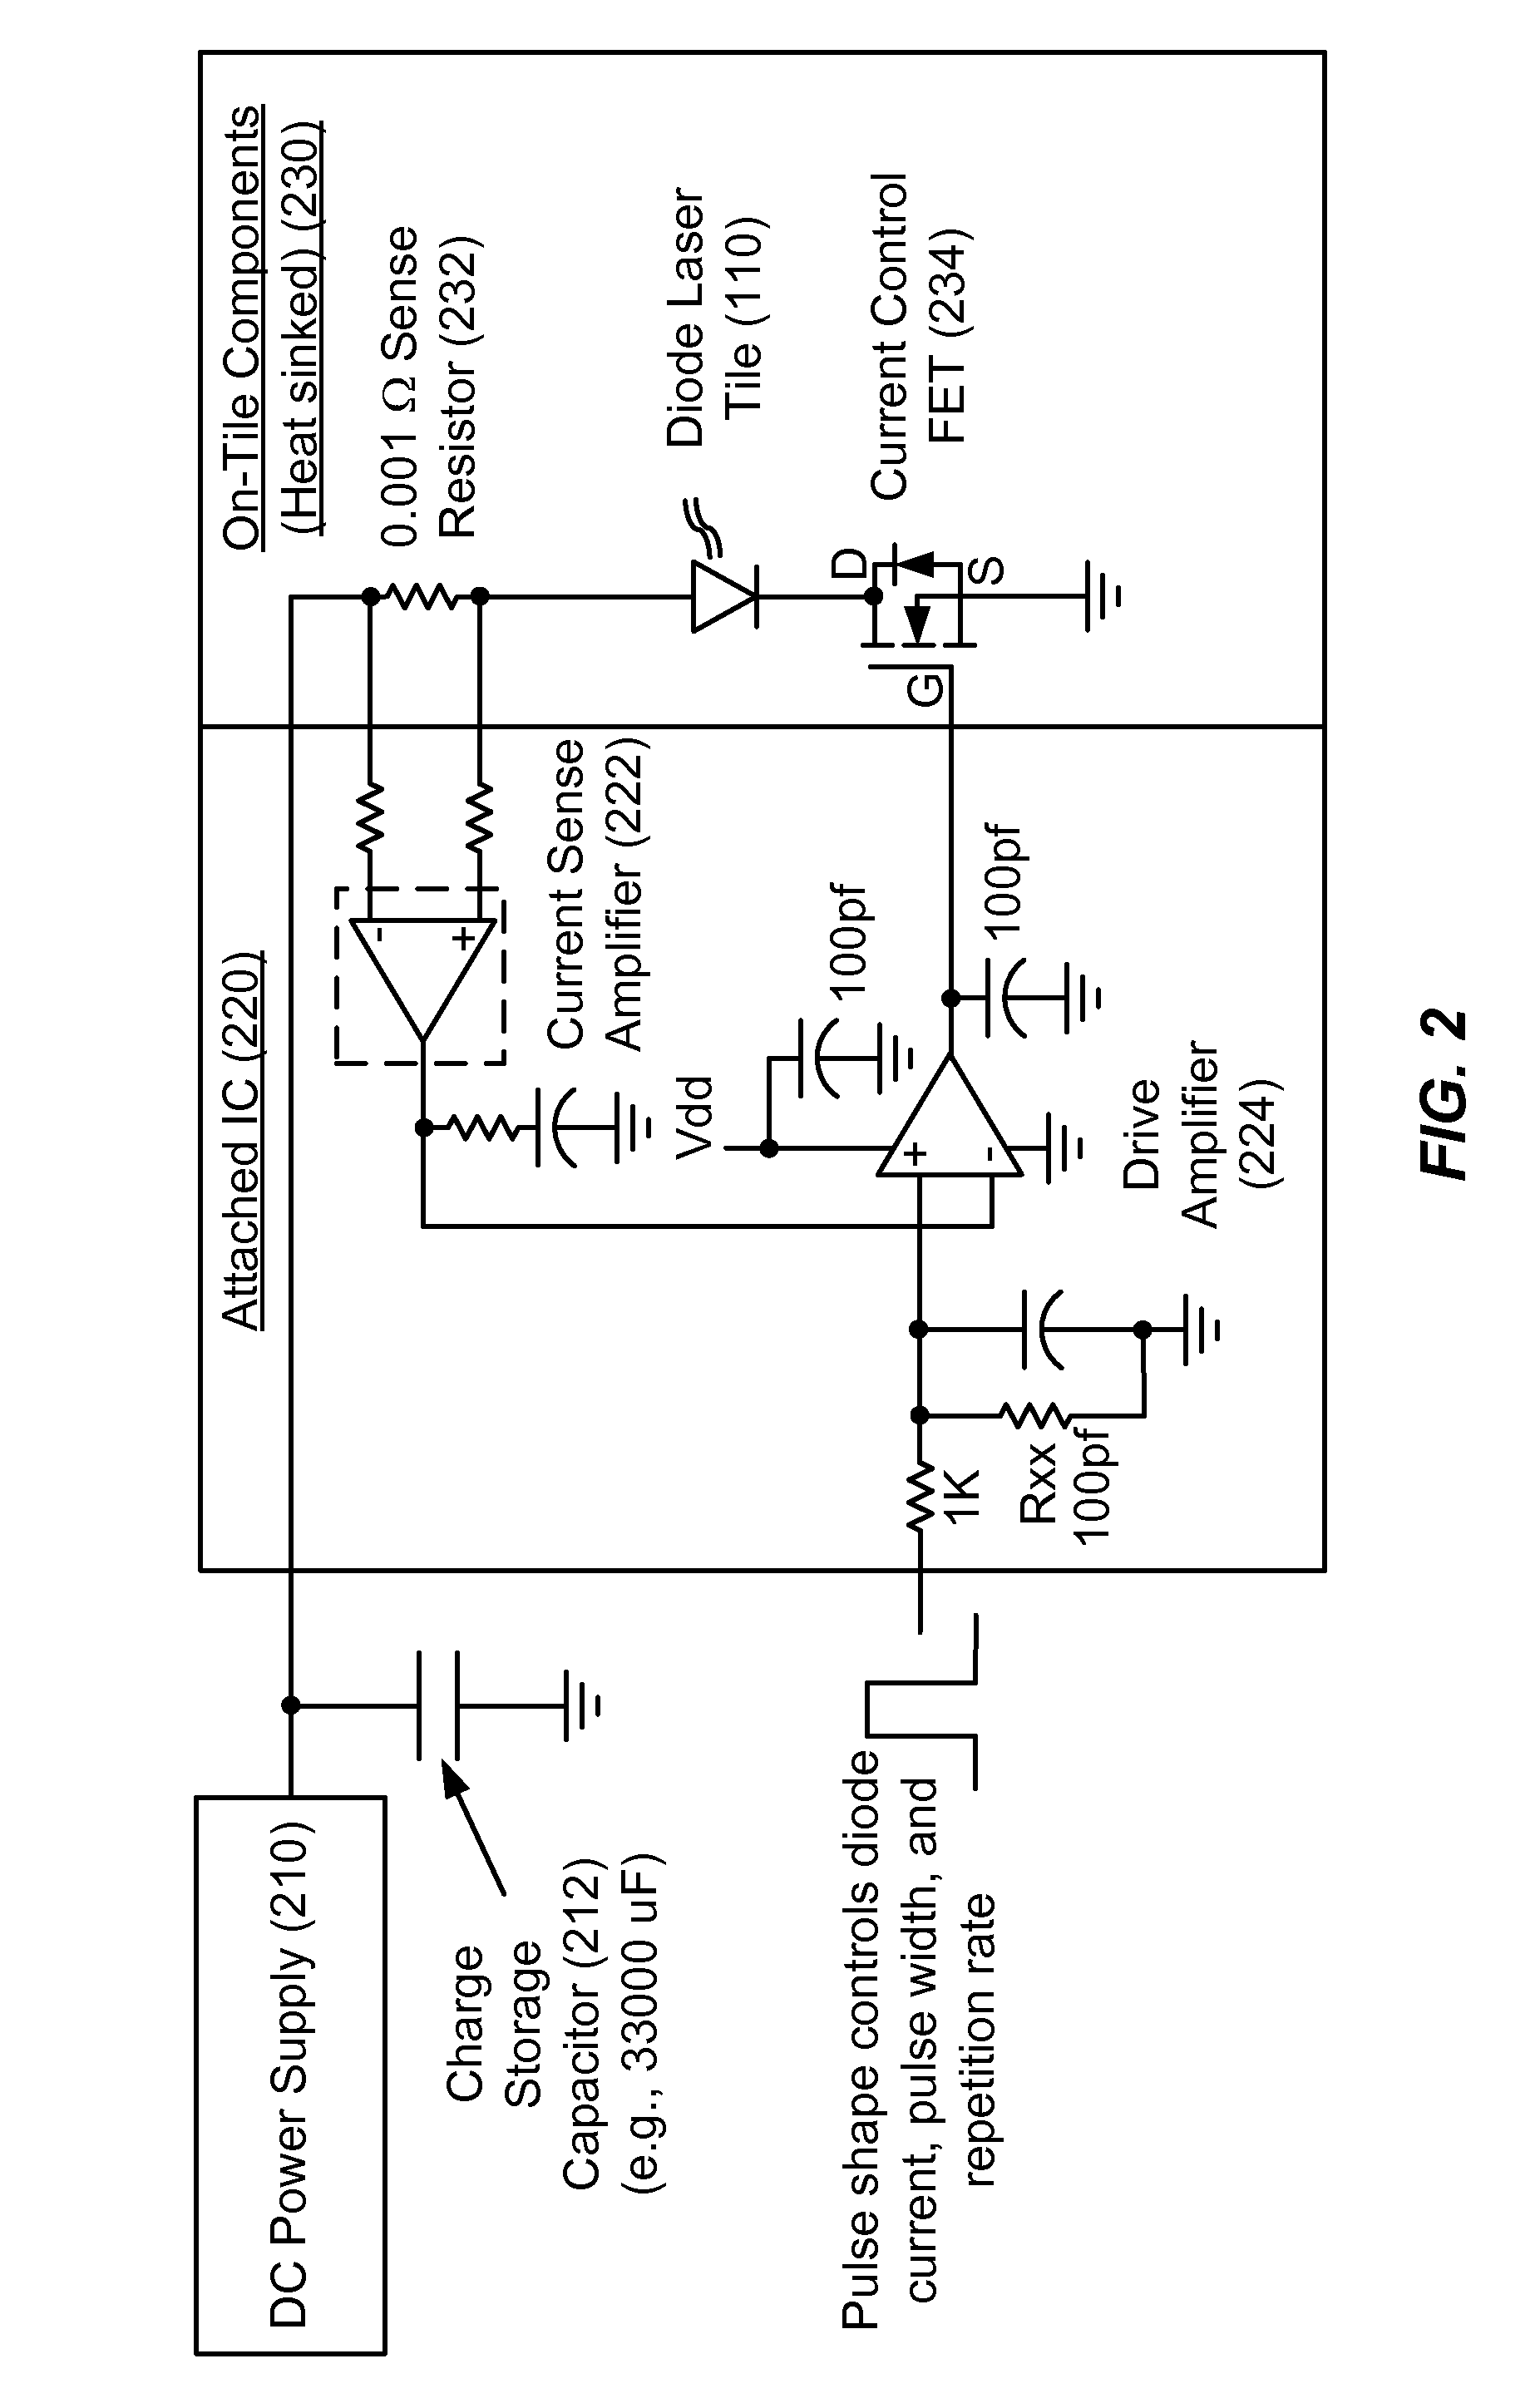 Method and system for powering and cooling semiconductor lasers